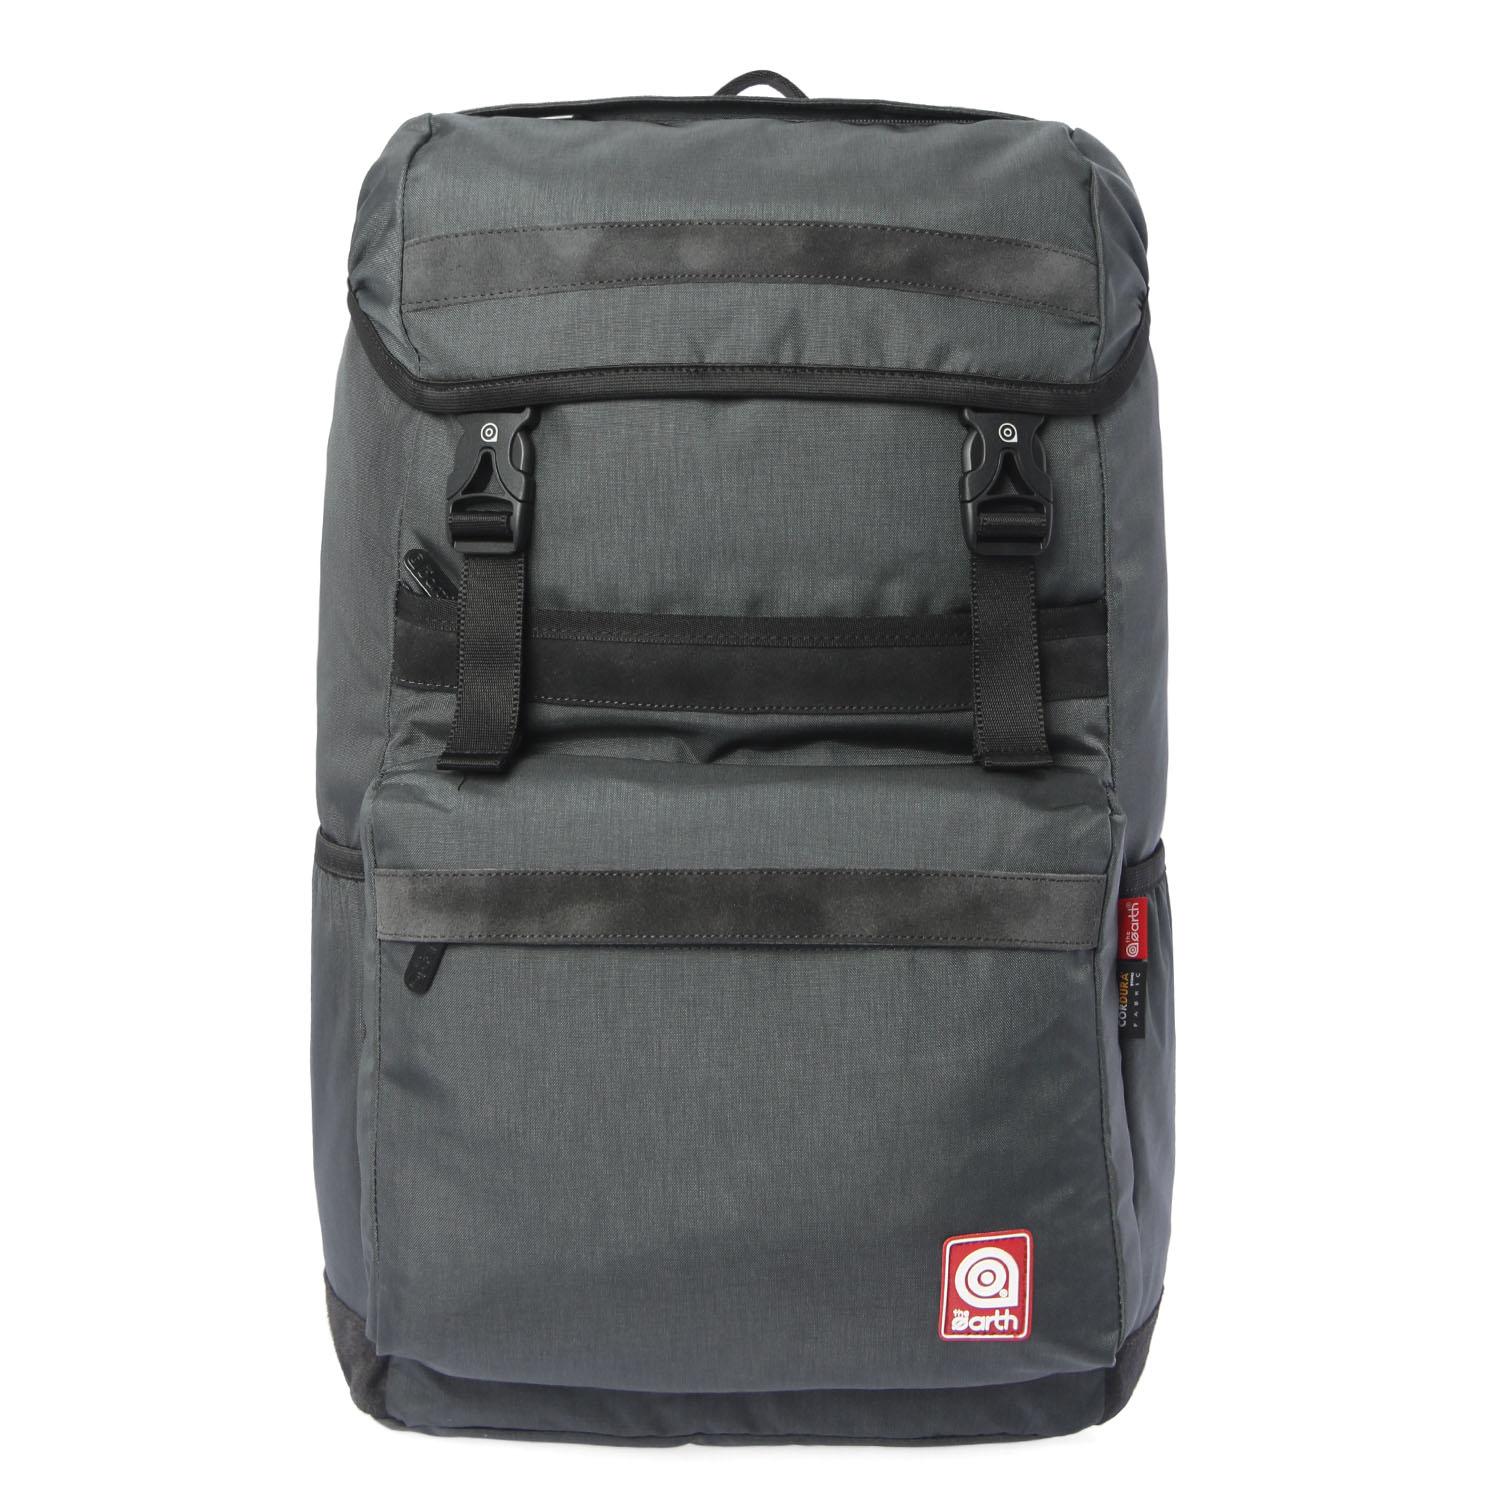 Foto [The Earth] New Disaster Cordura Laptop Backpack - Grey foto 825400